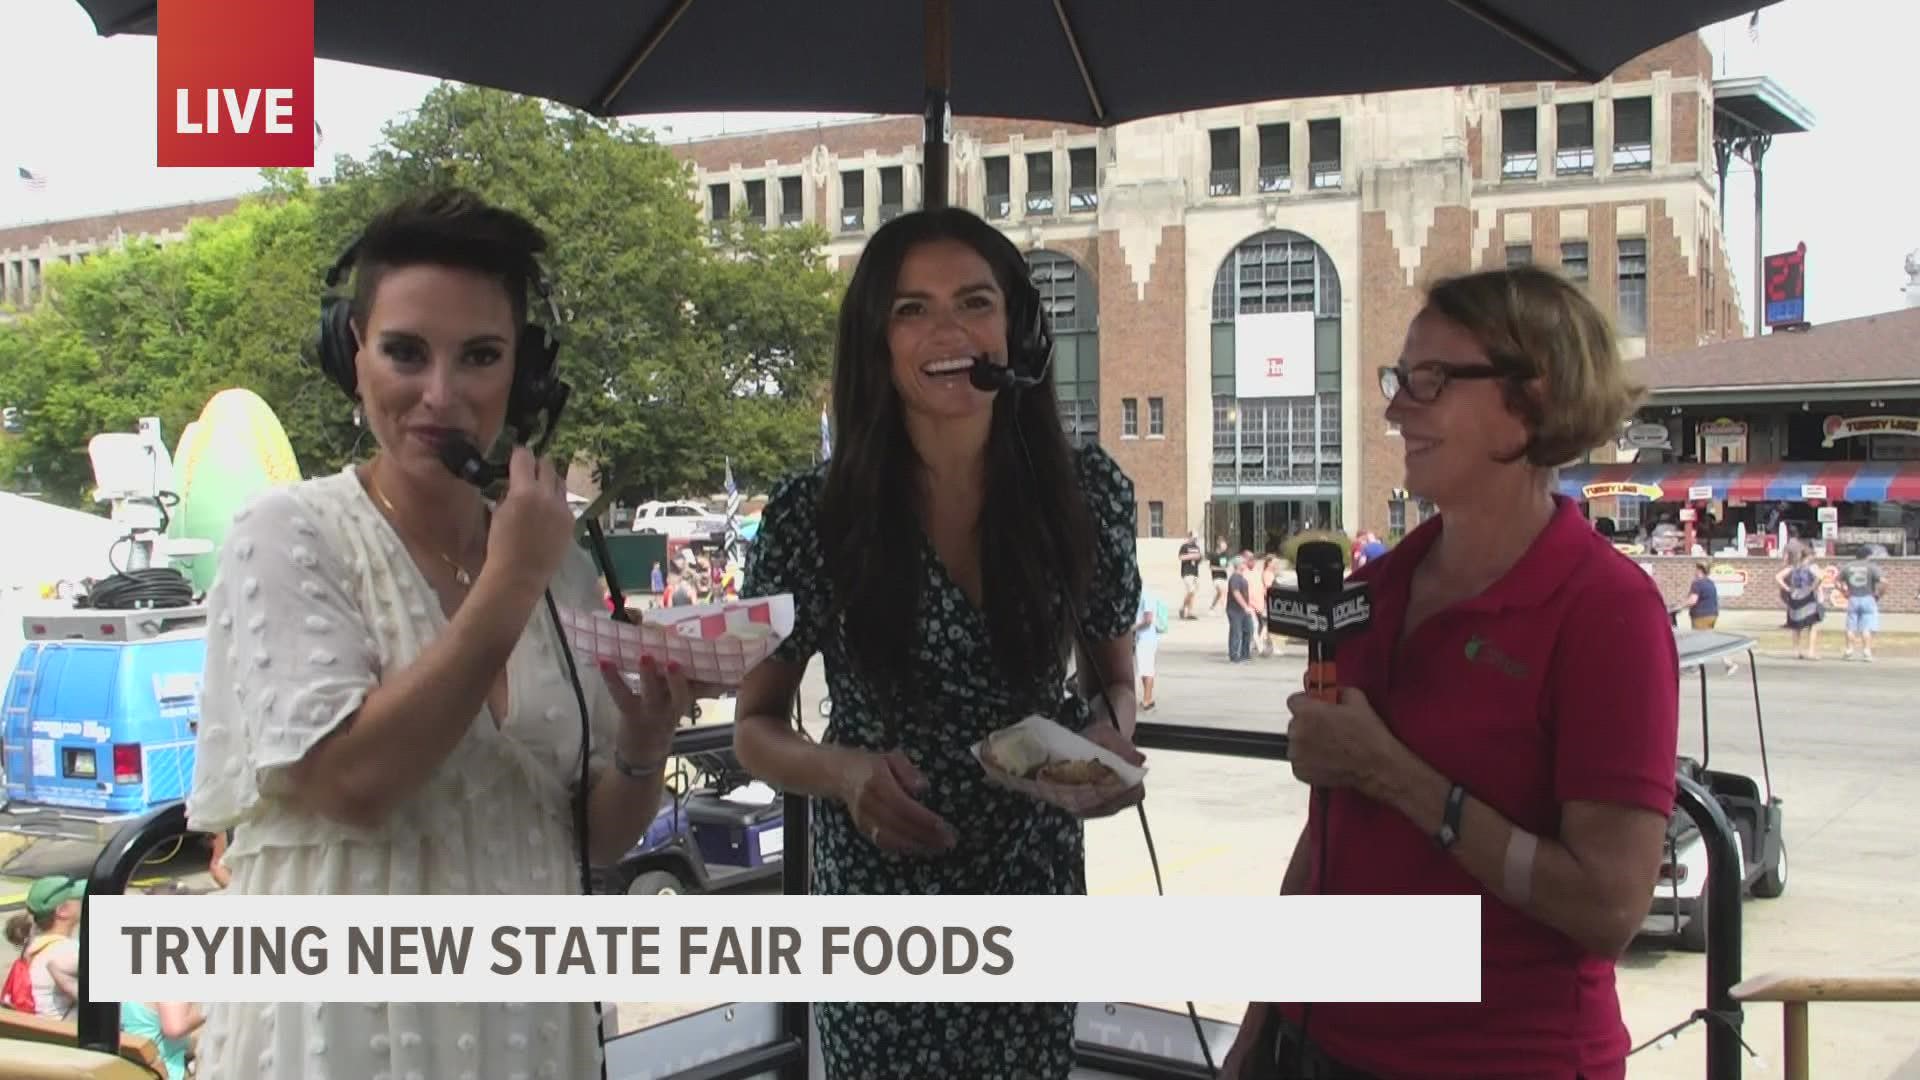 The Local 5 team got to try some healthy—and delicious—state fair treats from Applishus owner Connie Boesen.